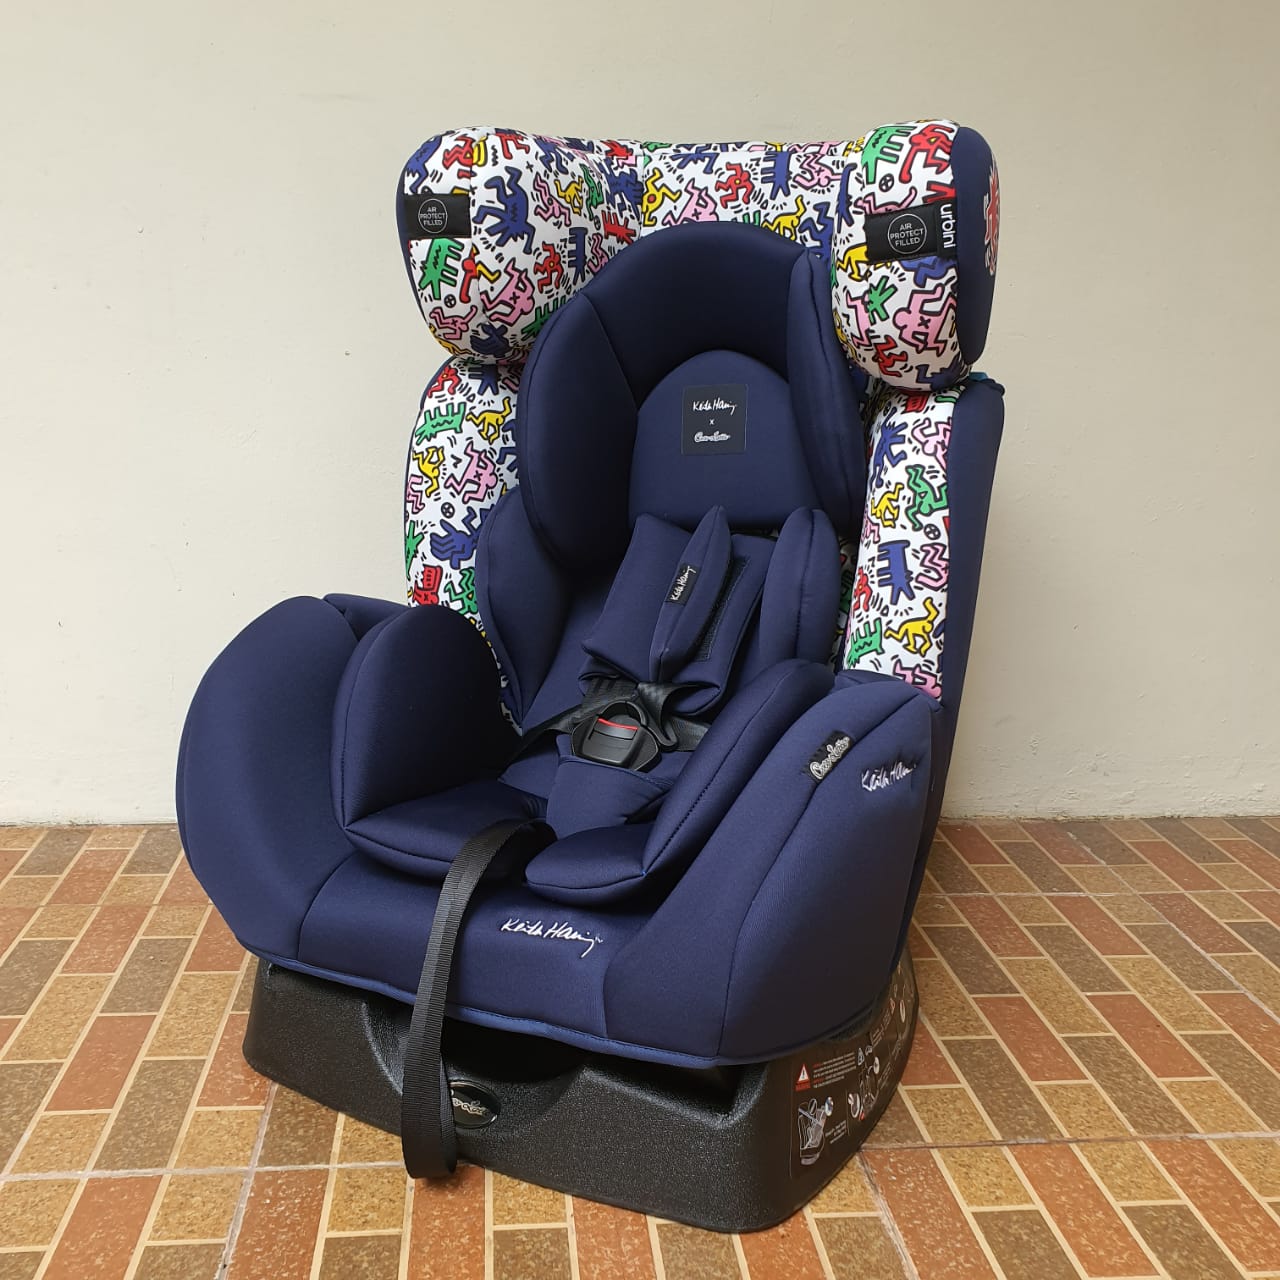 CAR SEAT COCOLATTE X KEITH HARING FULL COLOR